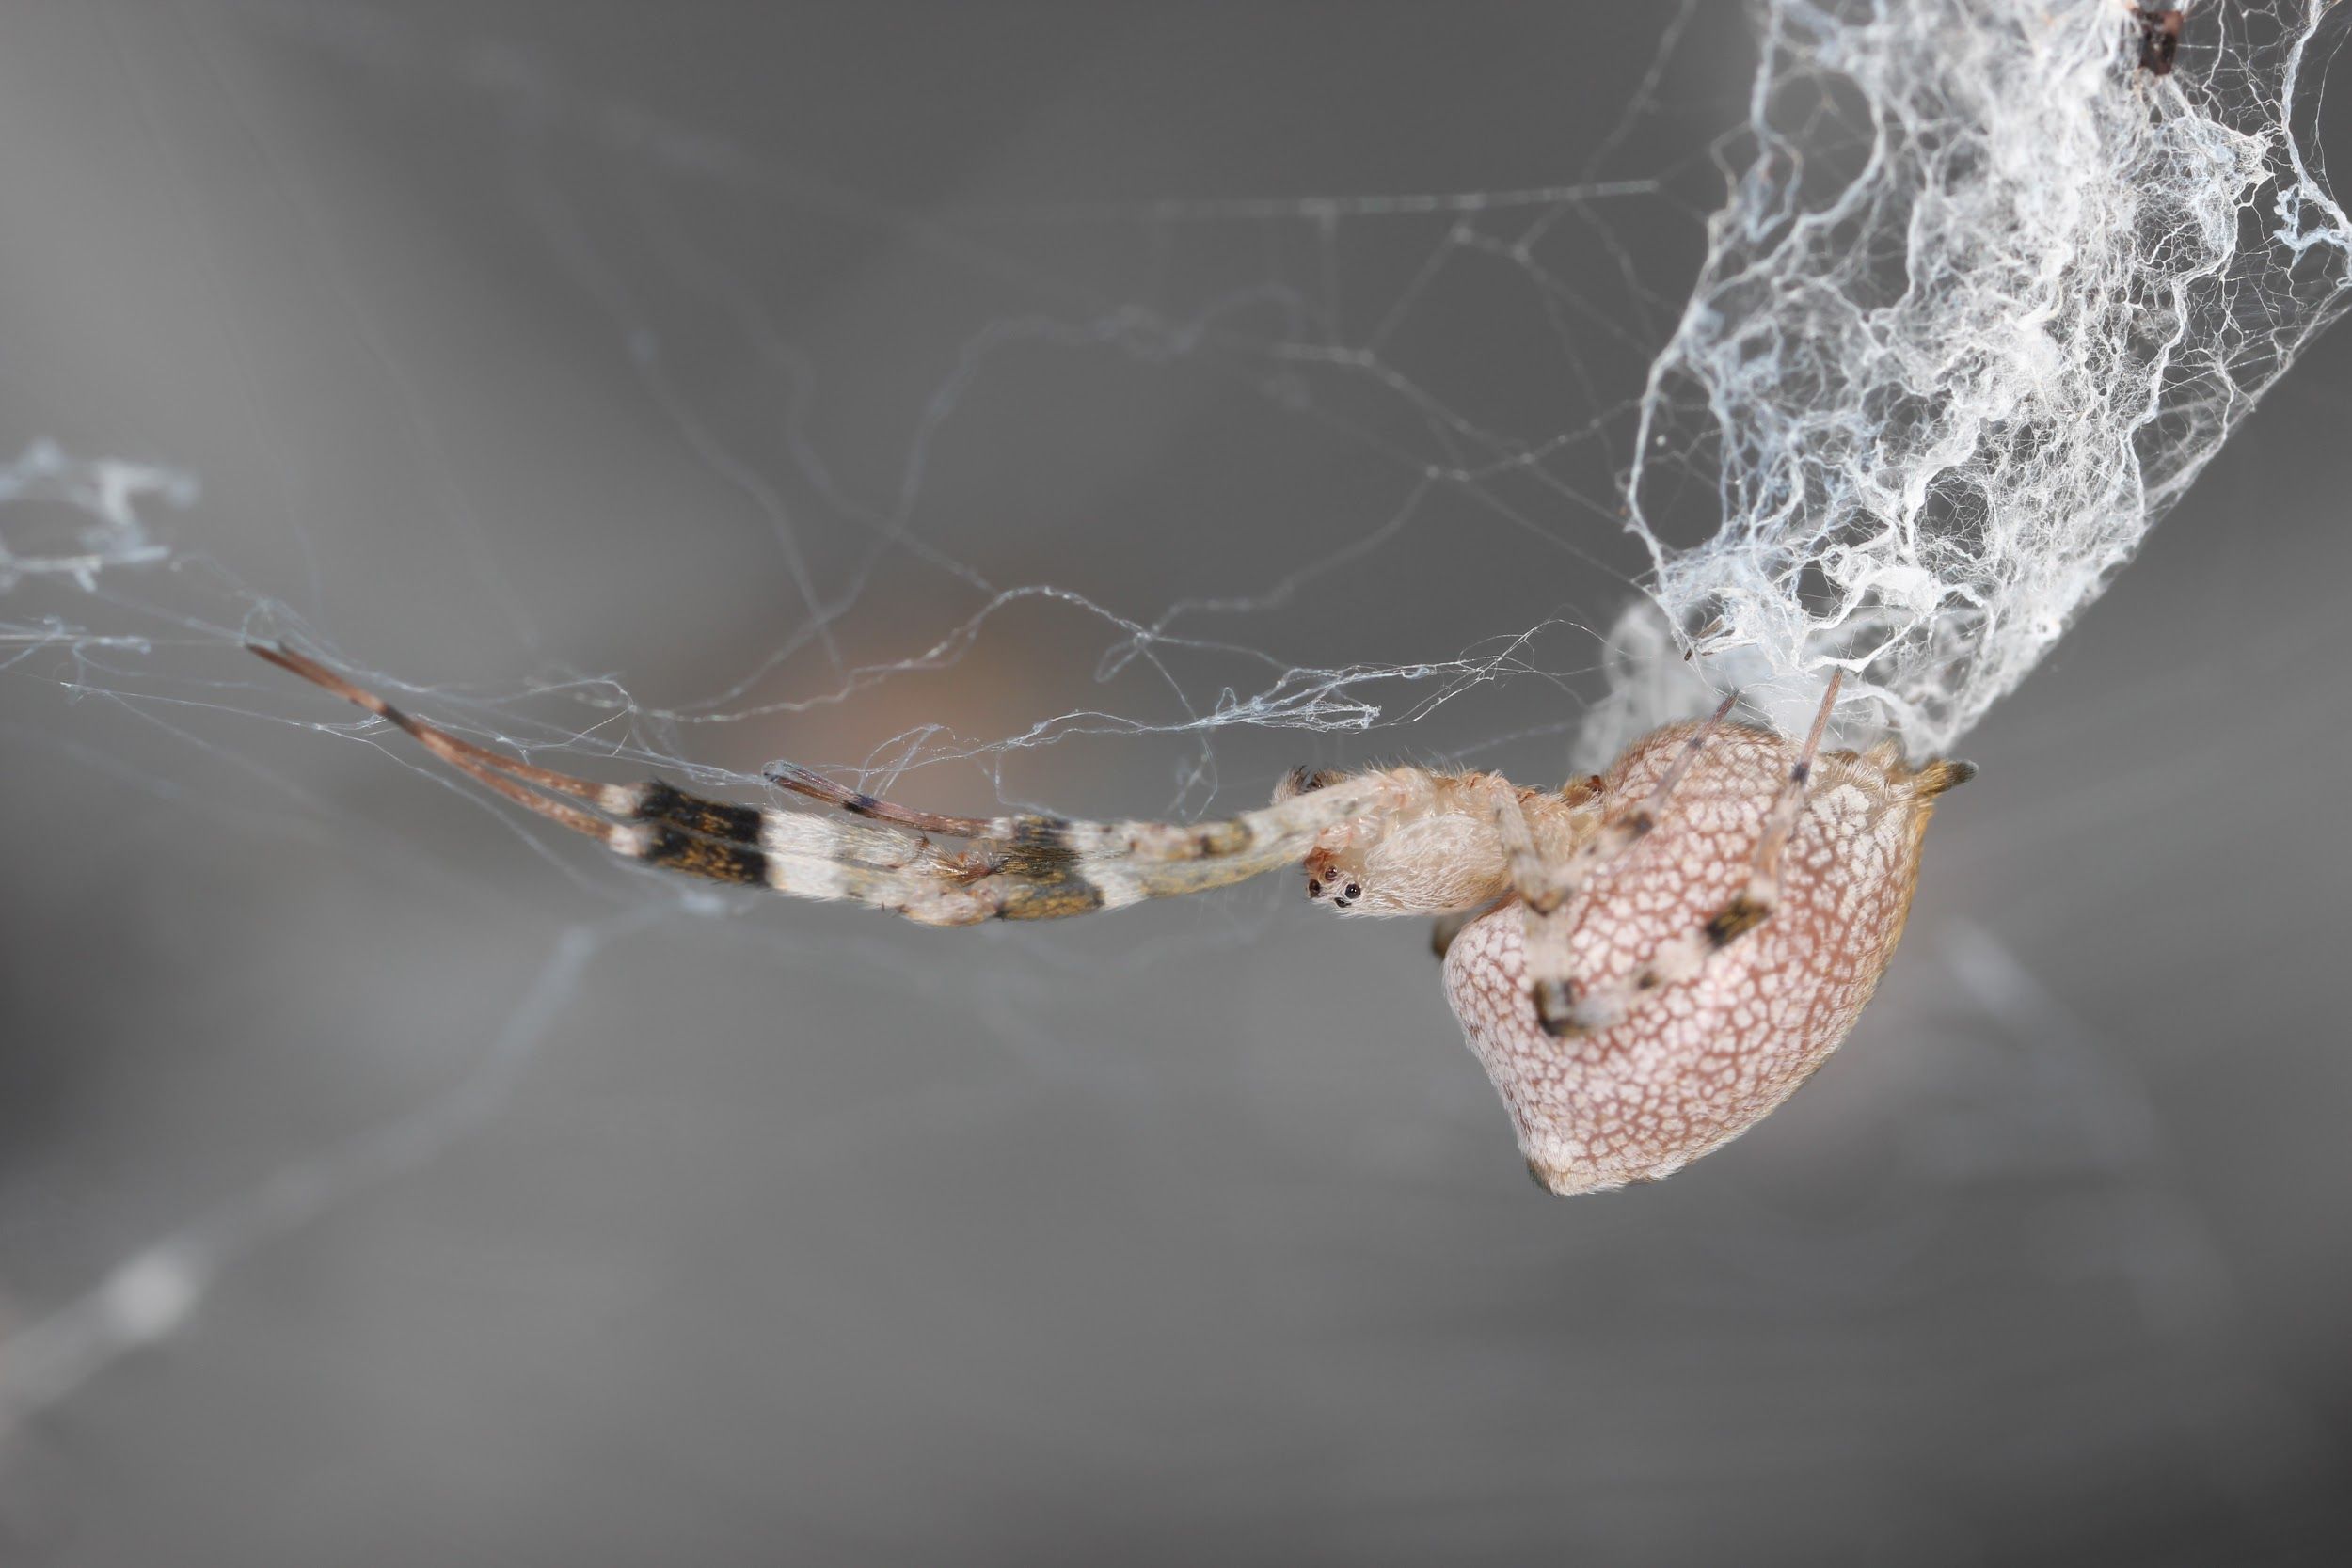 A hackled orb weaver (Uloboridae) in its fuzzy hackled orb web. Spiders in this family often rest in their webs with the first and second pairs of legs outstretched. 